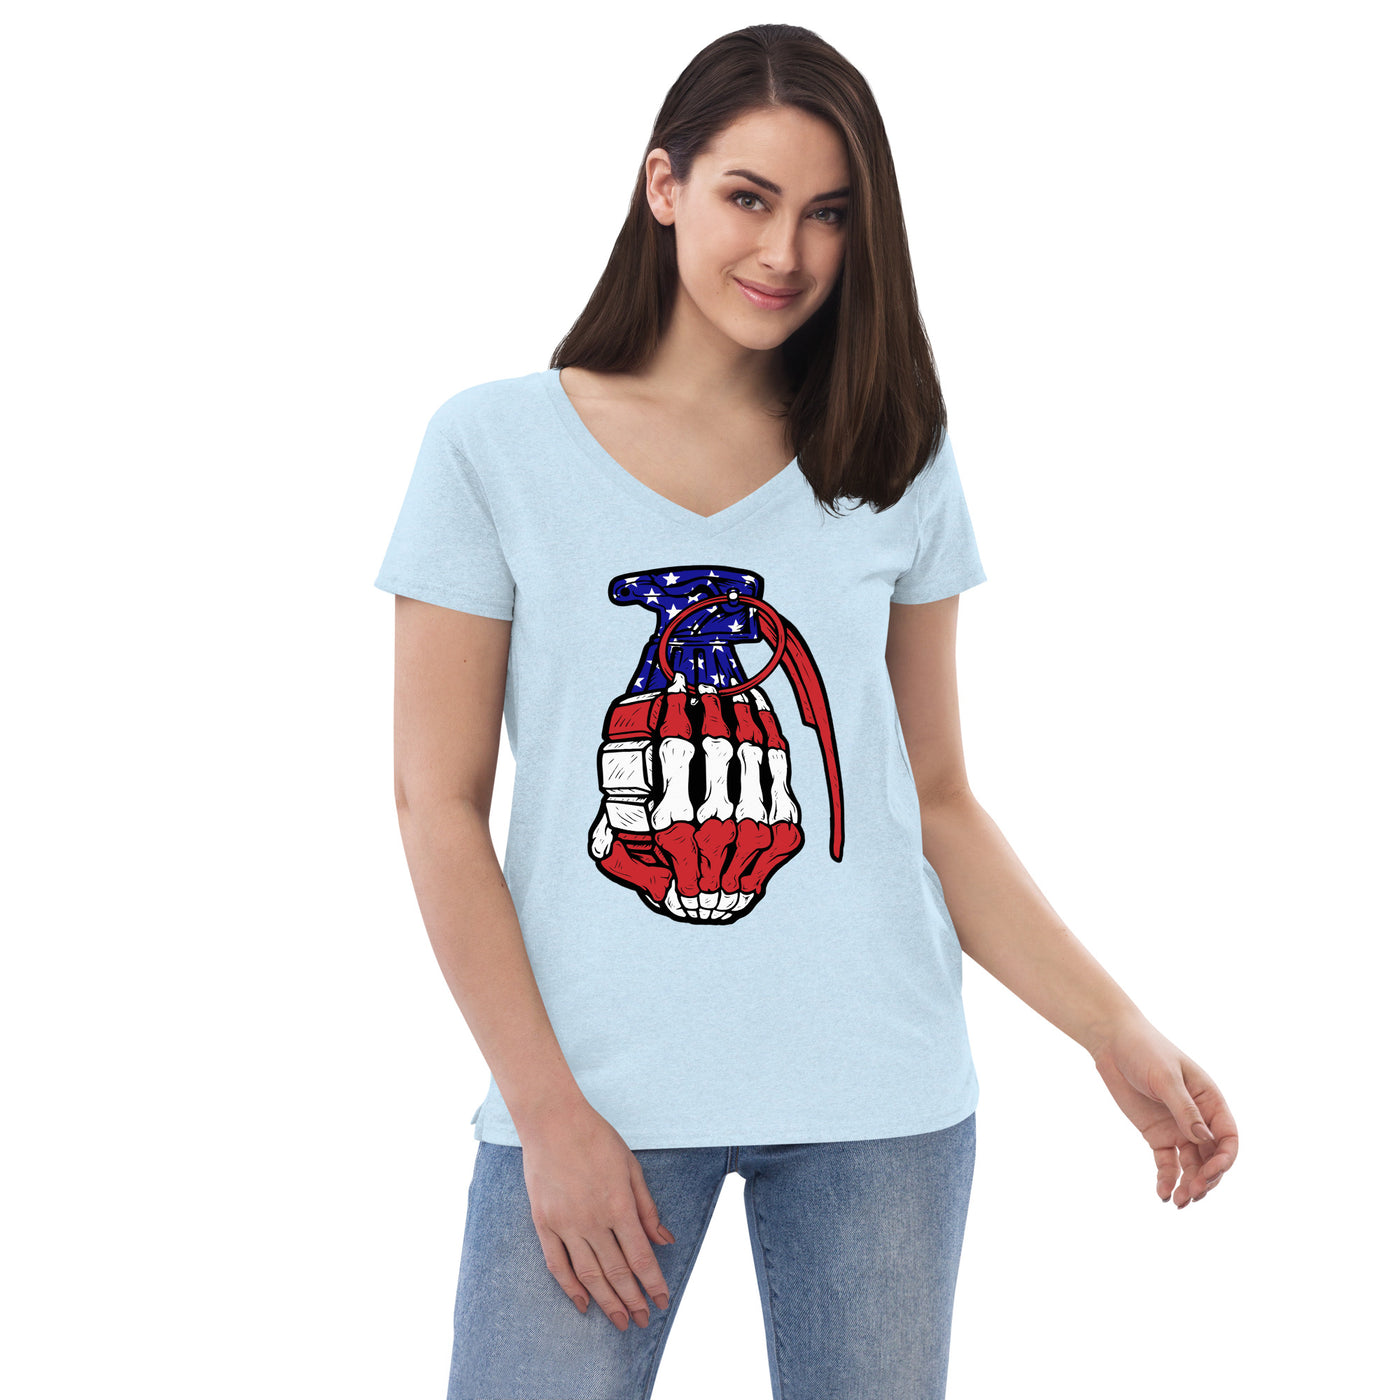 Women’s recycled v-neck t-shirt Red White and Blue